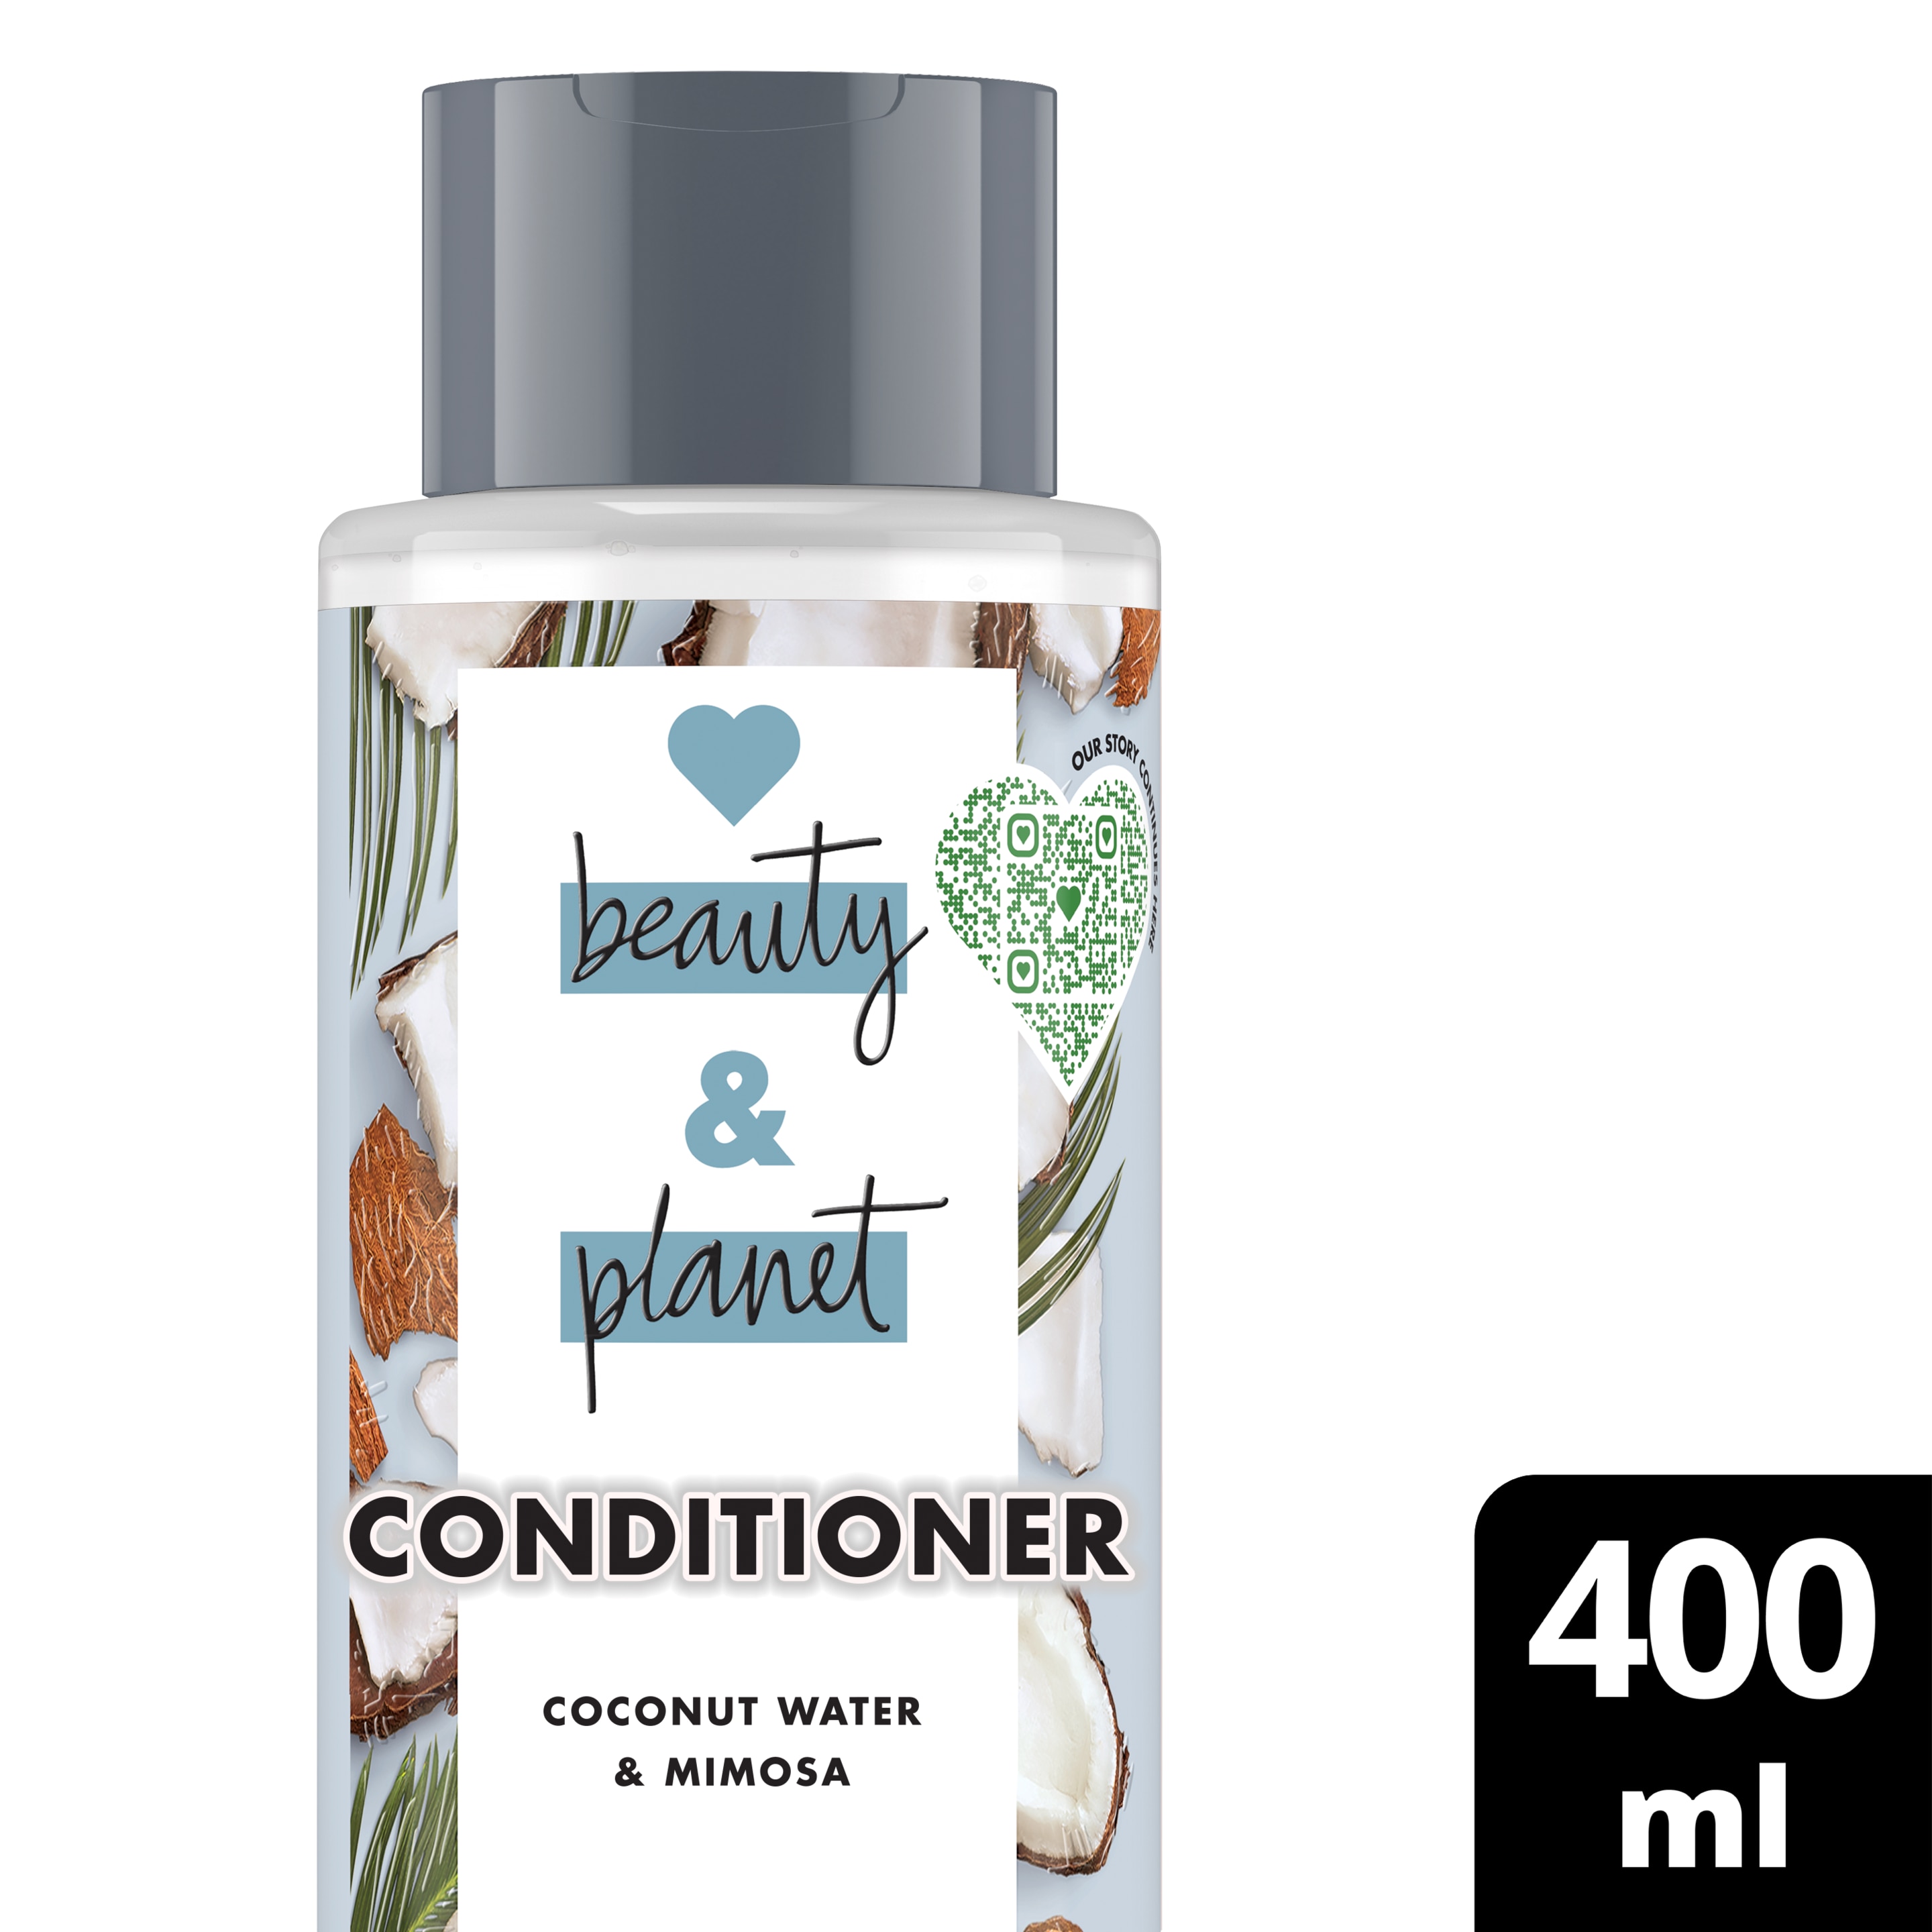 coconut water & mimosa flower conditioner